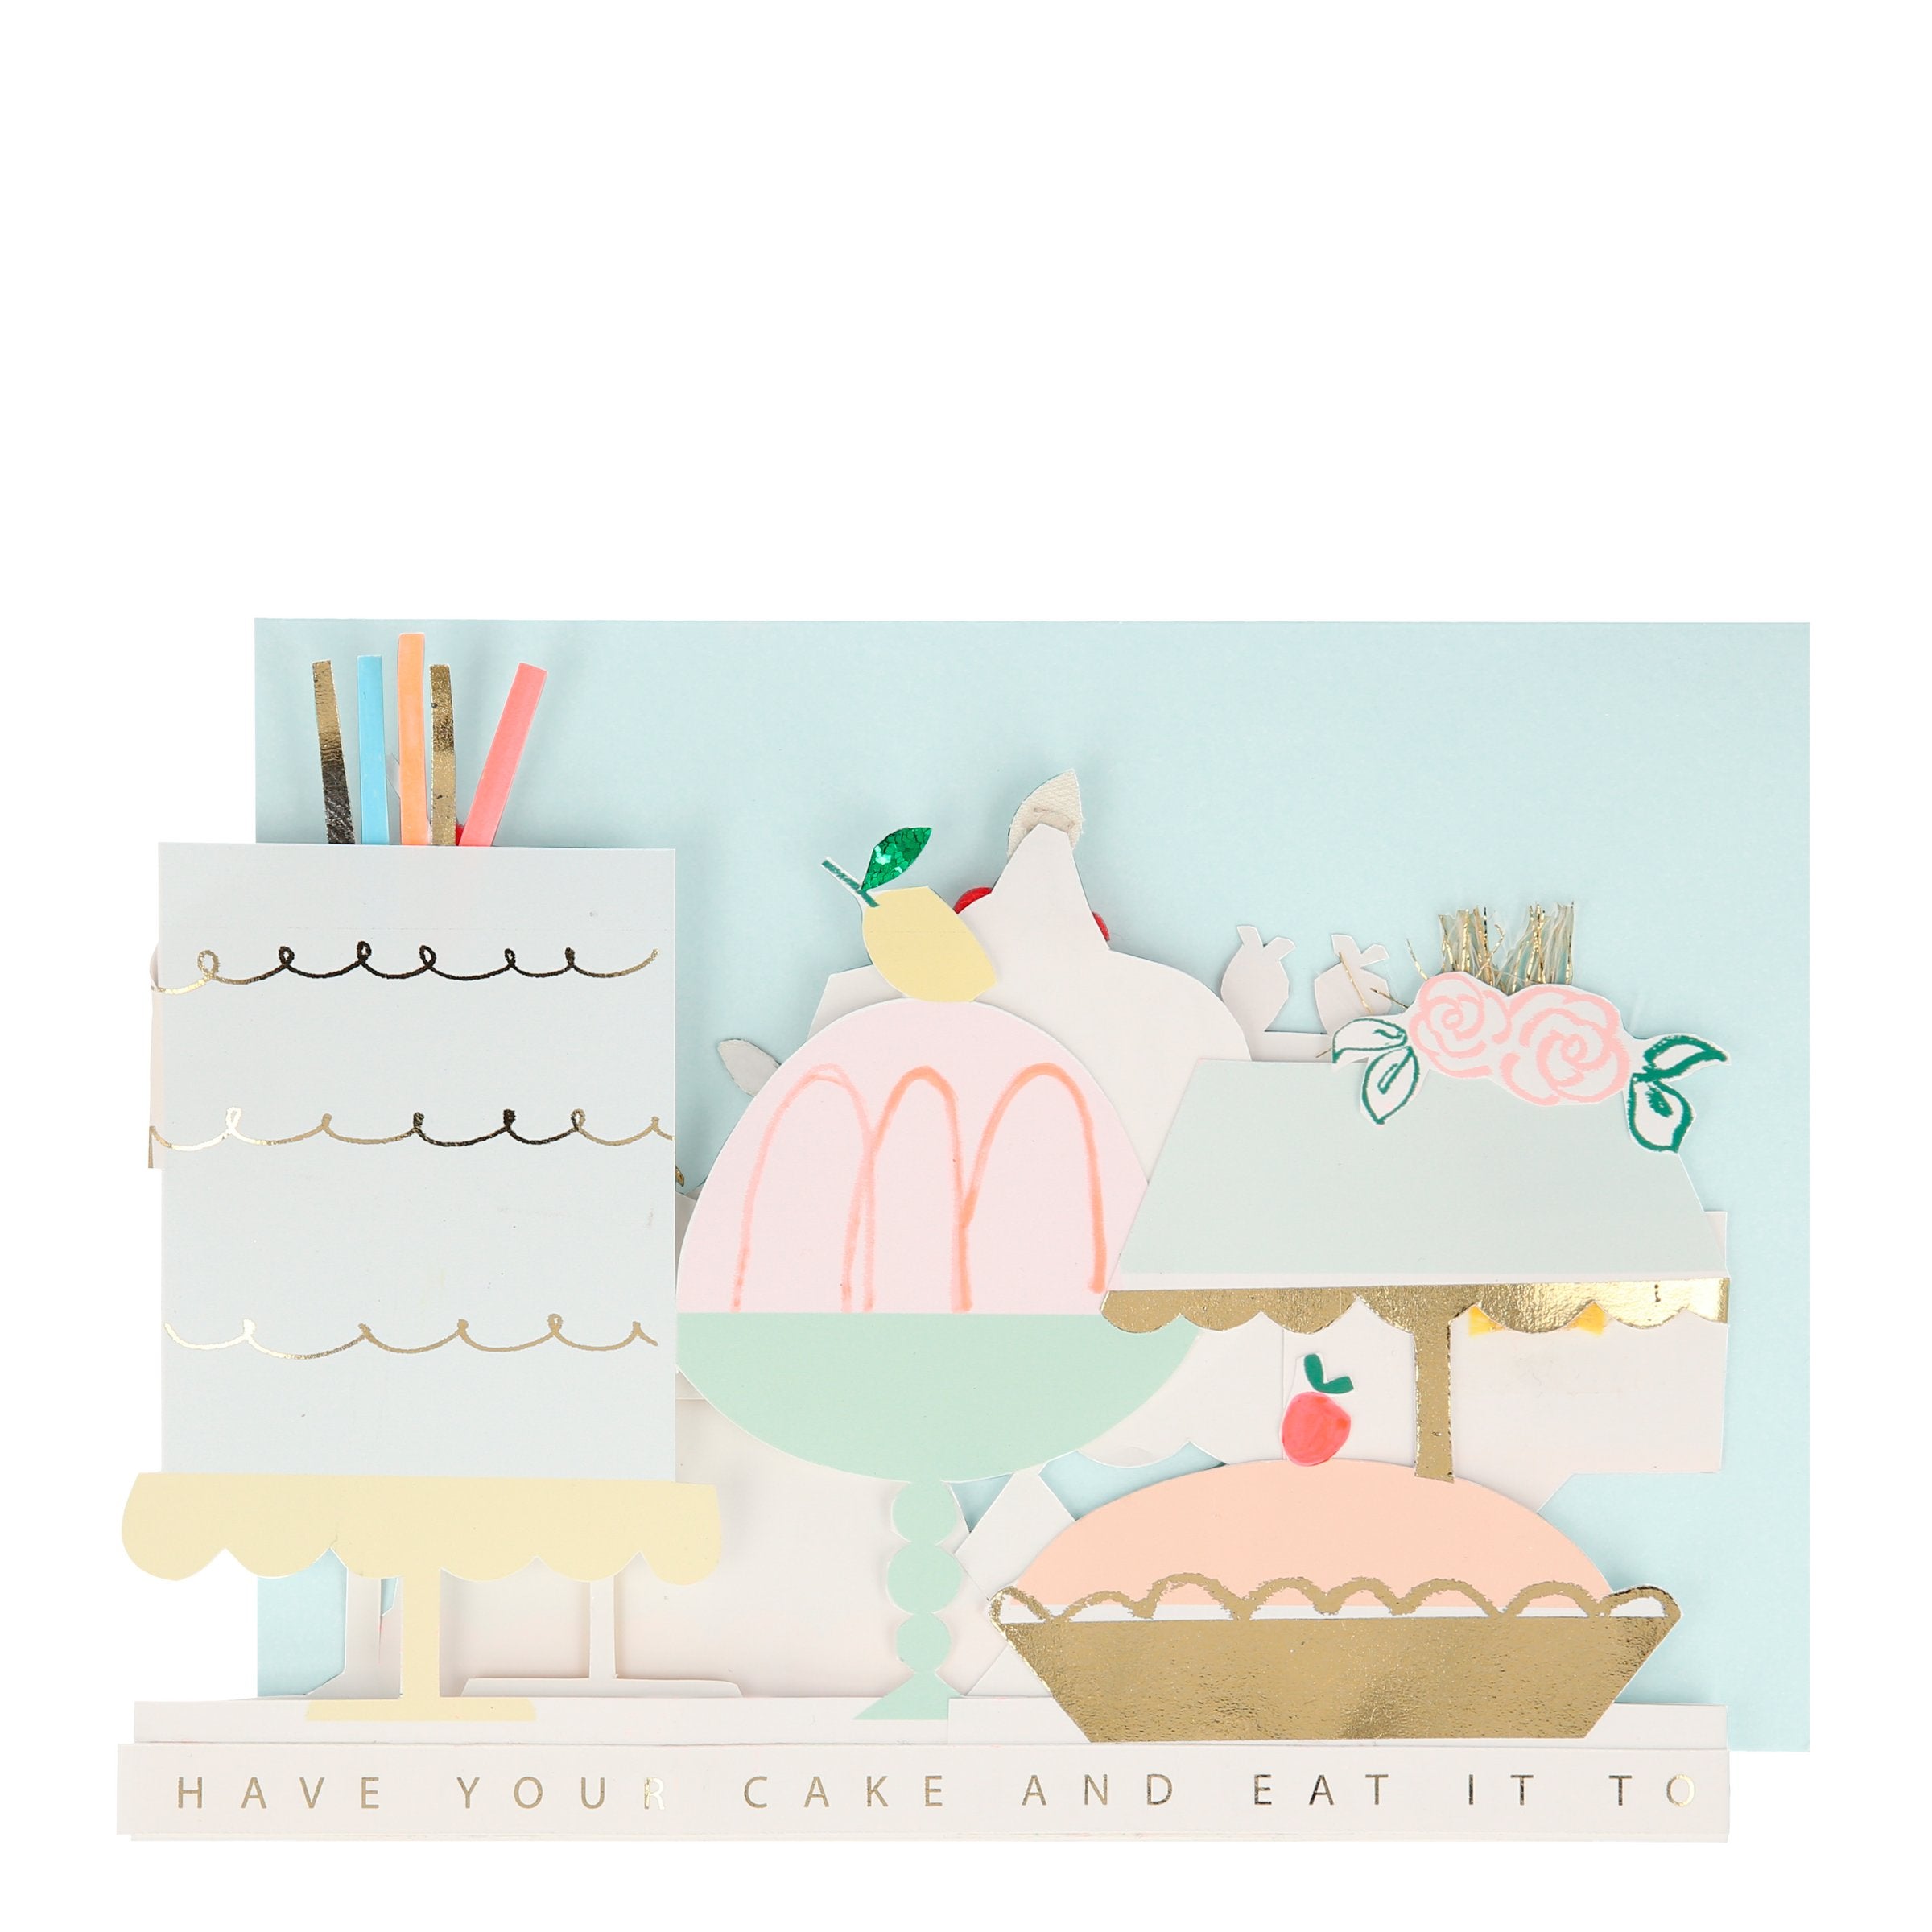 Our 3D birthday card features cakes with pompom embellishments.